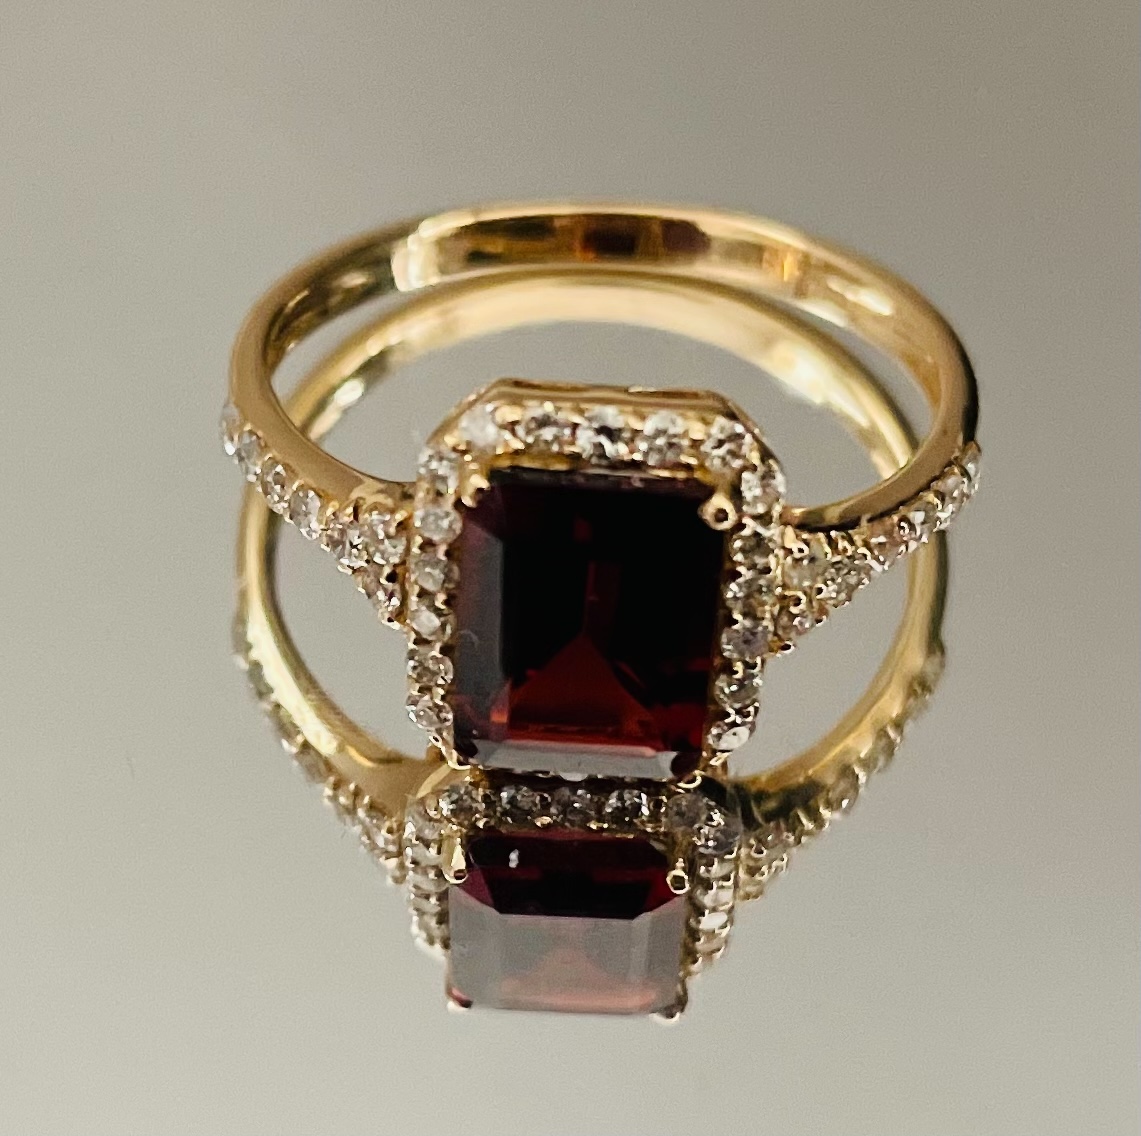 Beautiful Natural Garnet Ring With Diamonds And 18k Gold - Image 7 of 8